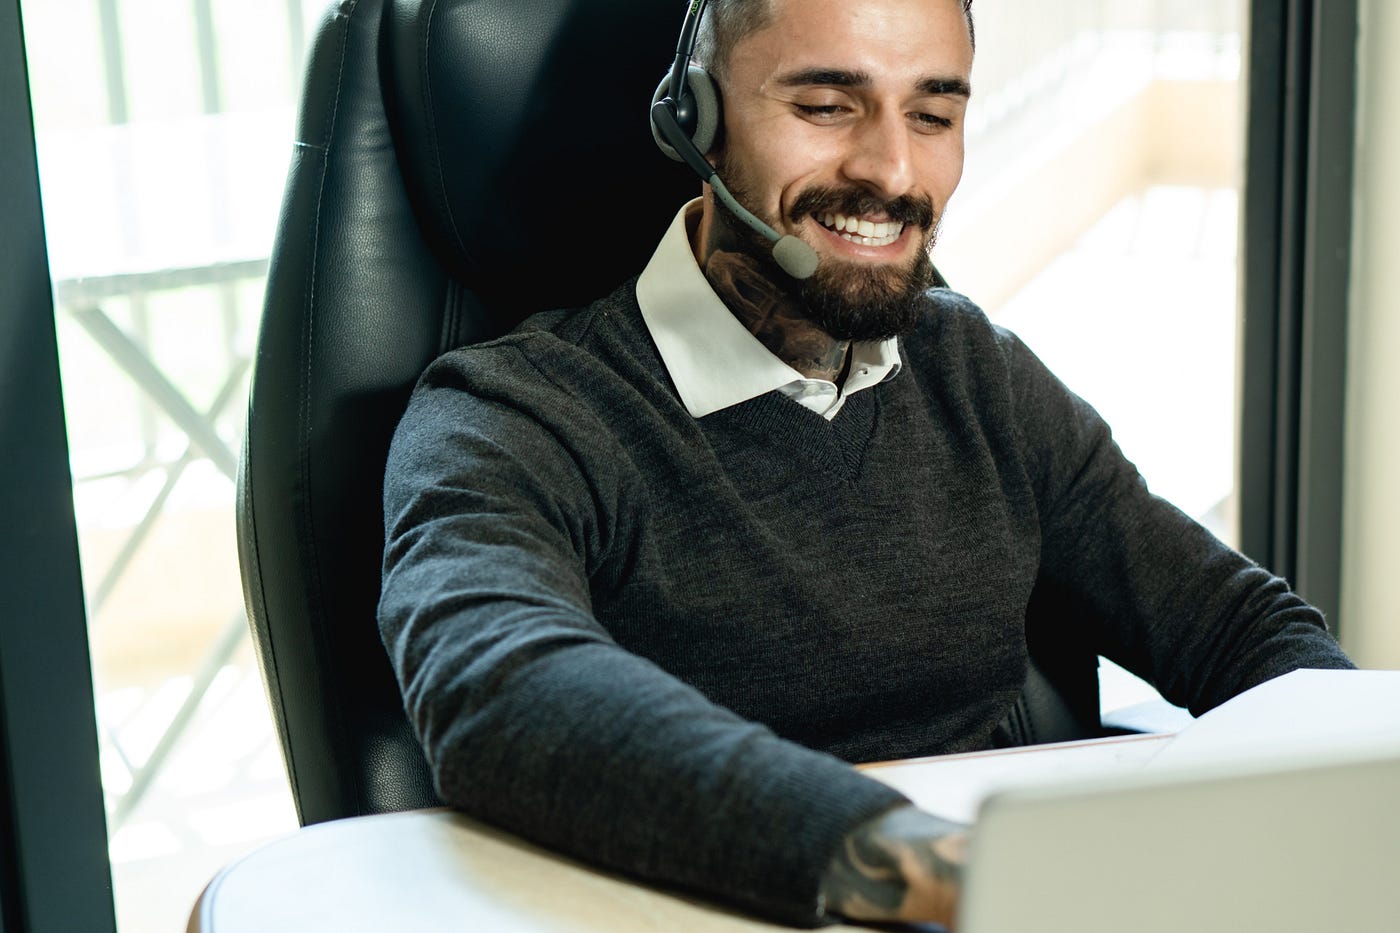 A man sitting at an office desk in business casual, smiling and having a headset on while looking at a laptop.